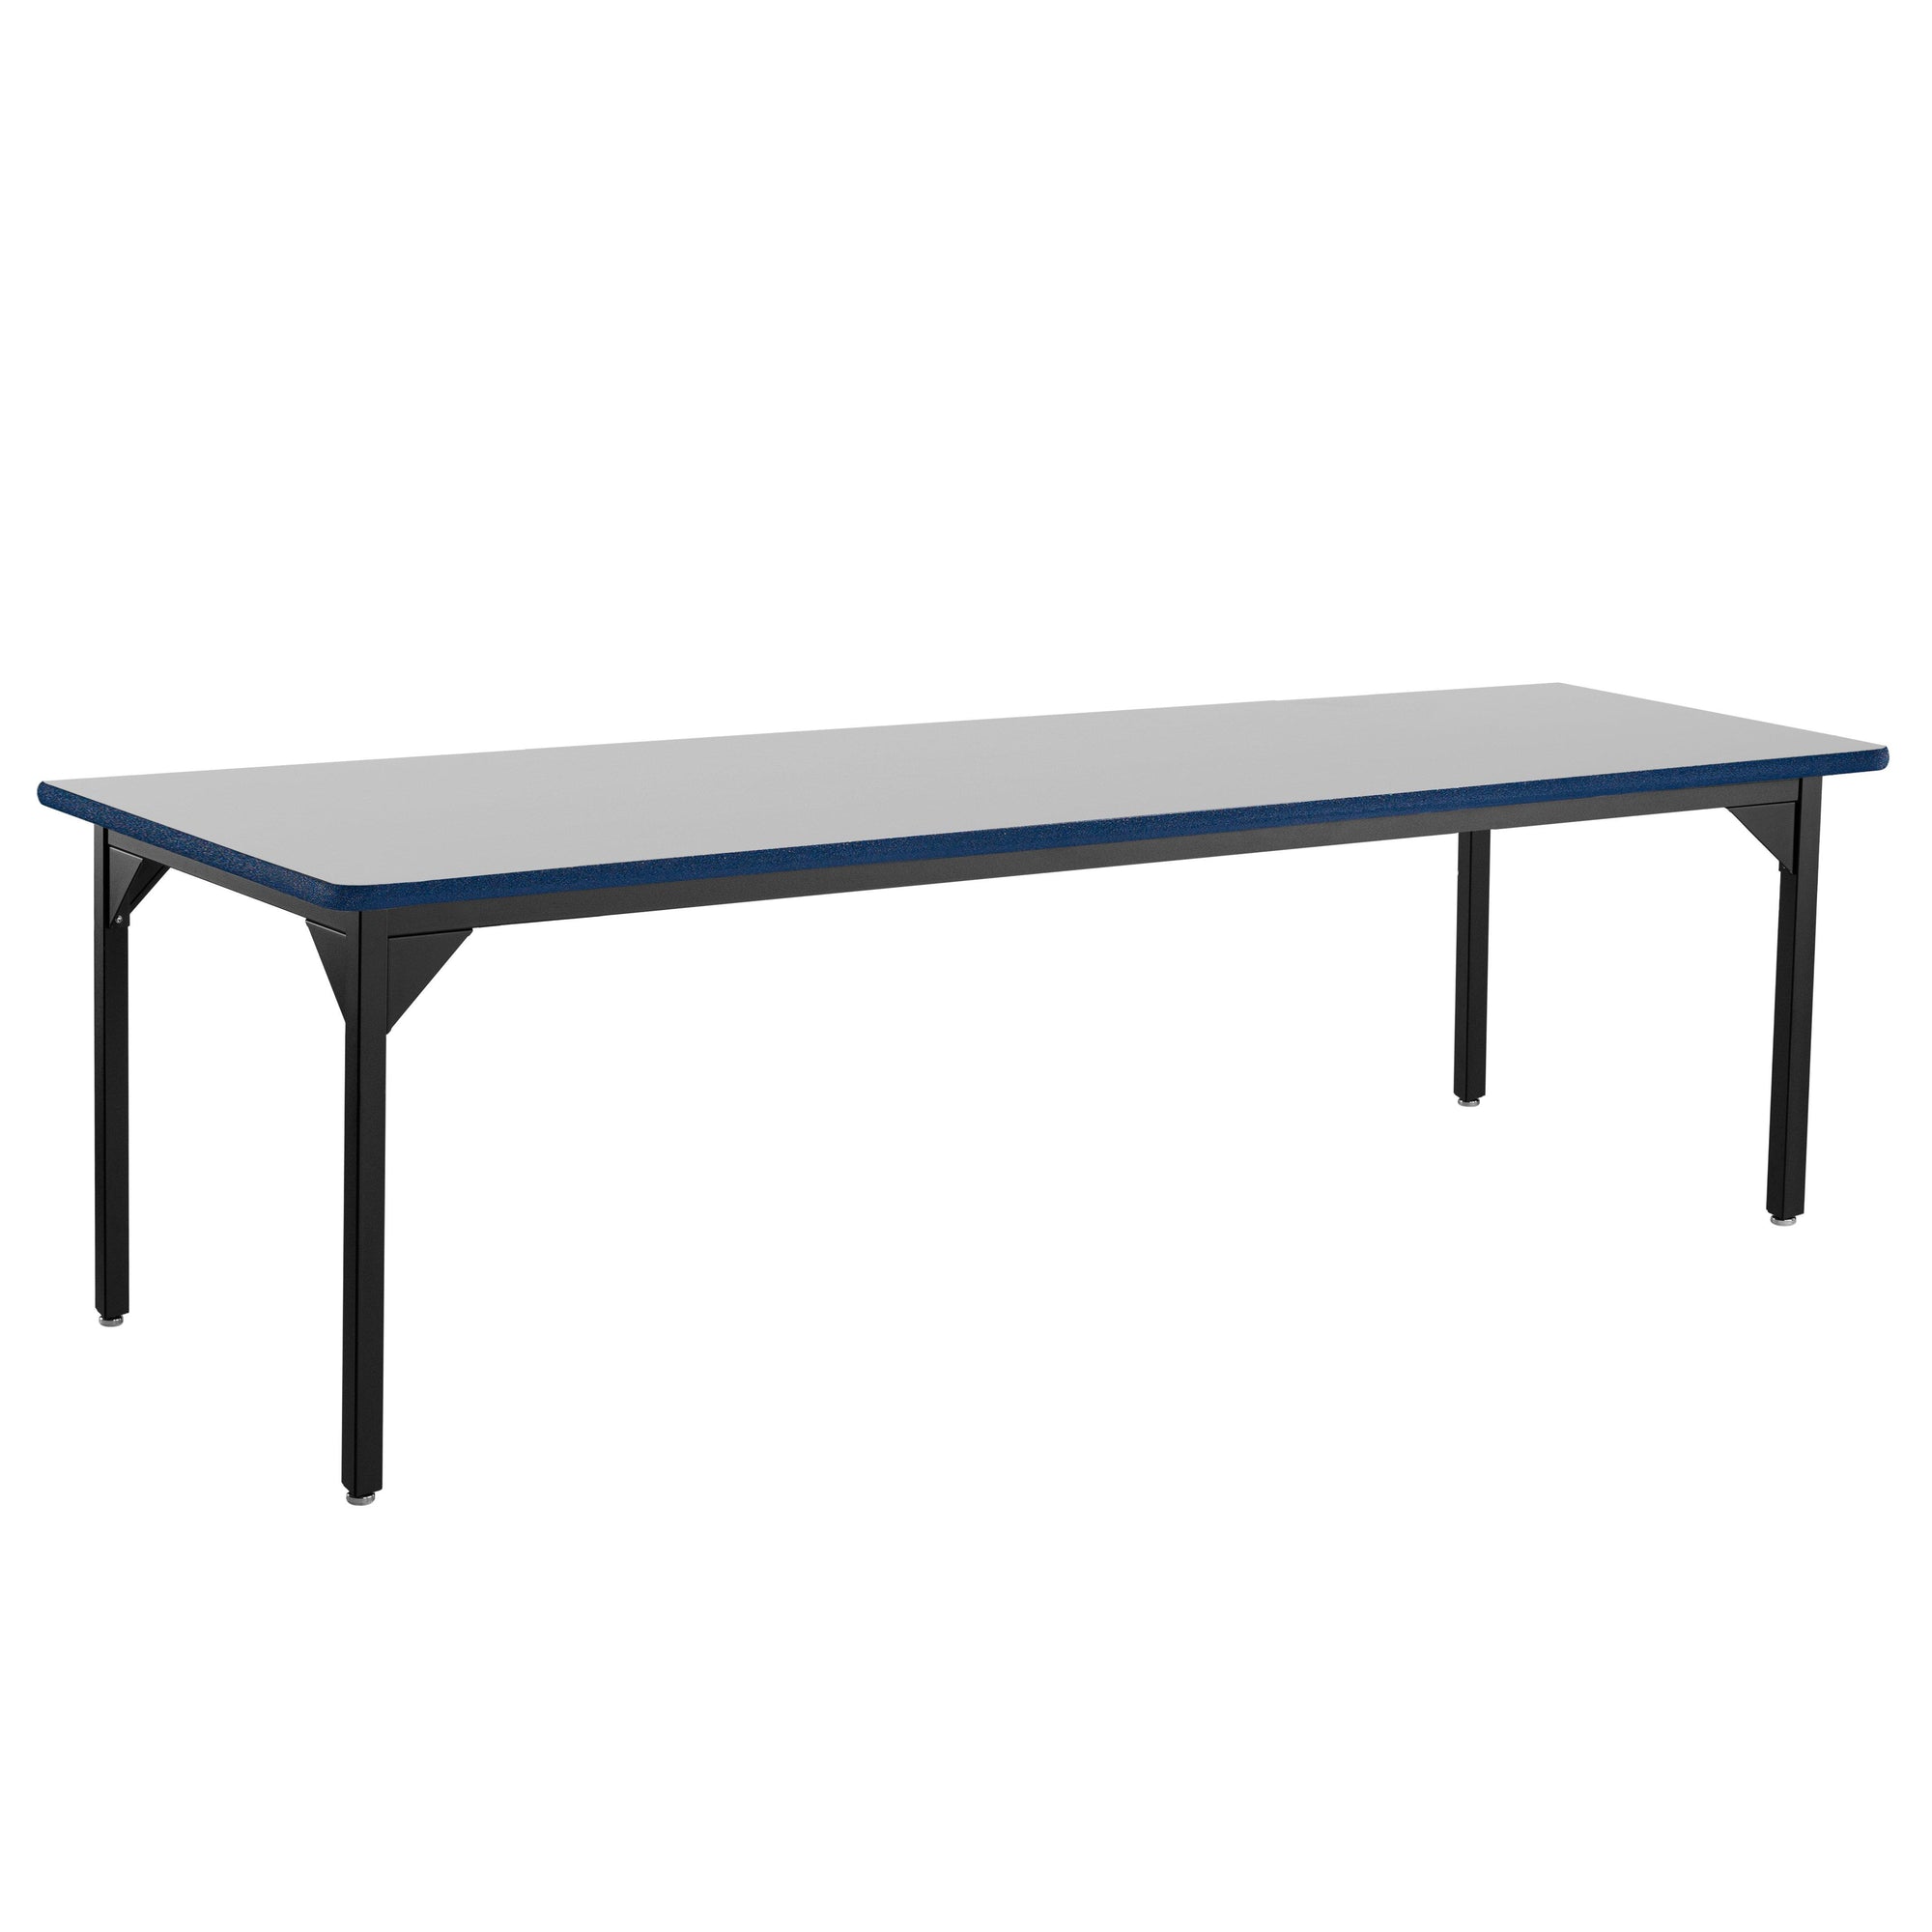 Heavy-Duty Fixed Height Utility Table, Black Frame, 36" x 72", Supreme High-Pressure Laminate Top with Black ProtectEdge